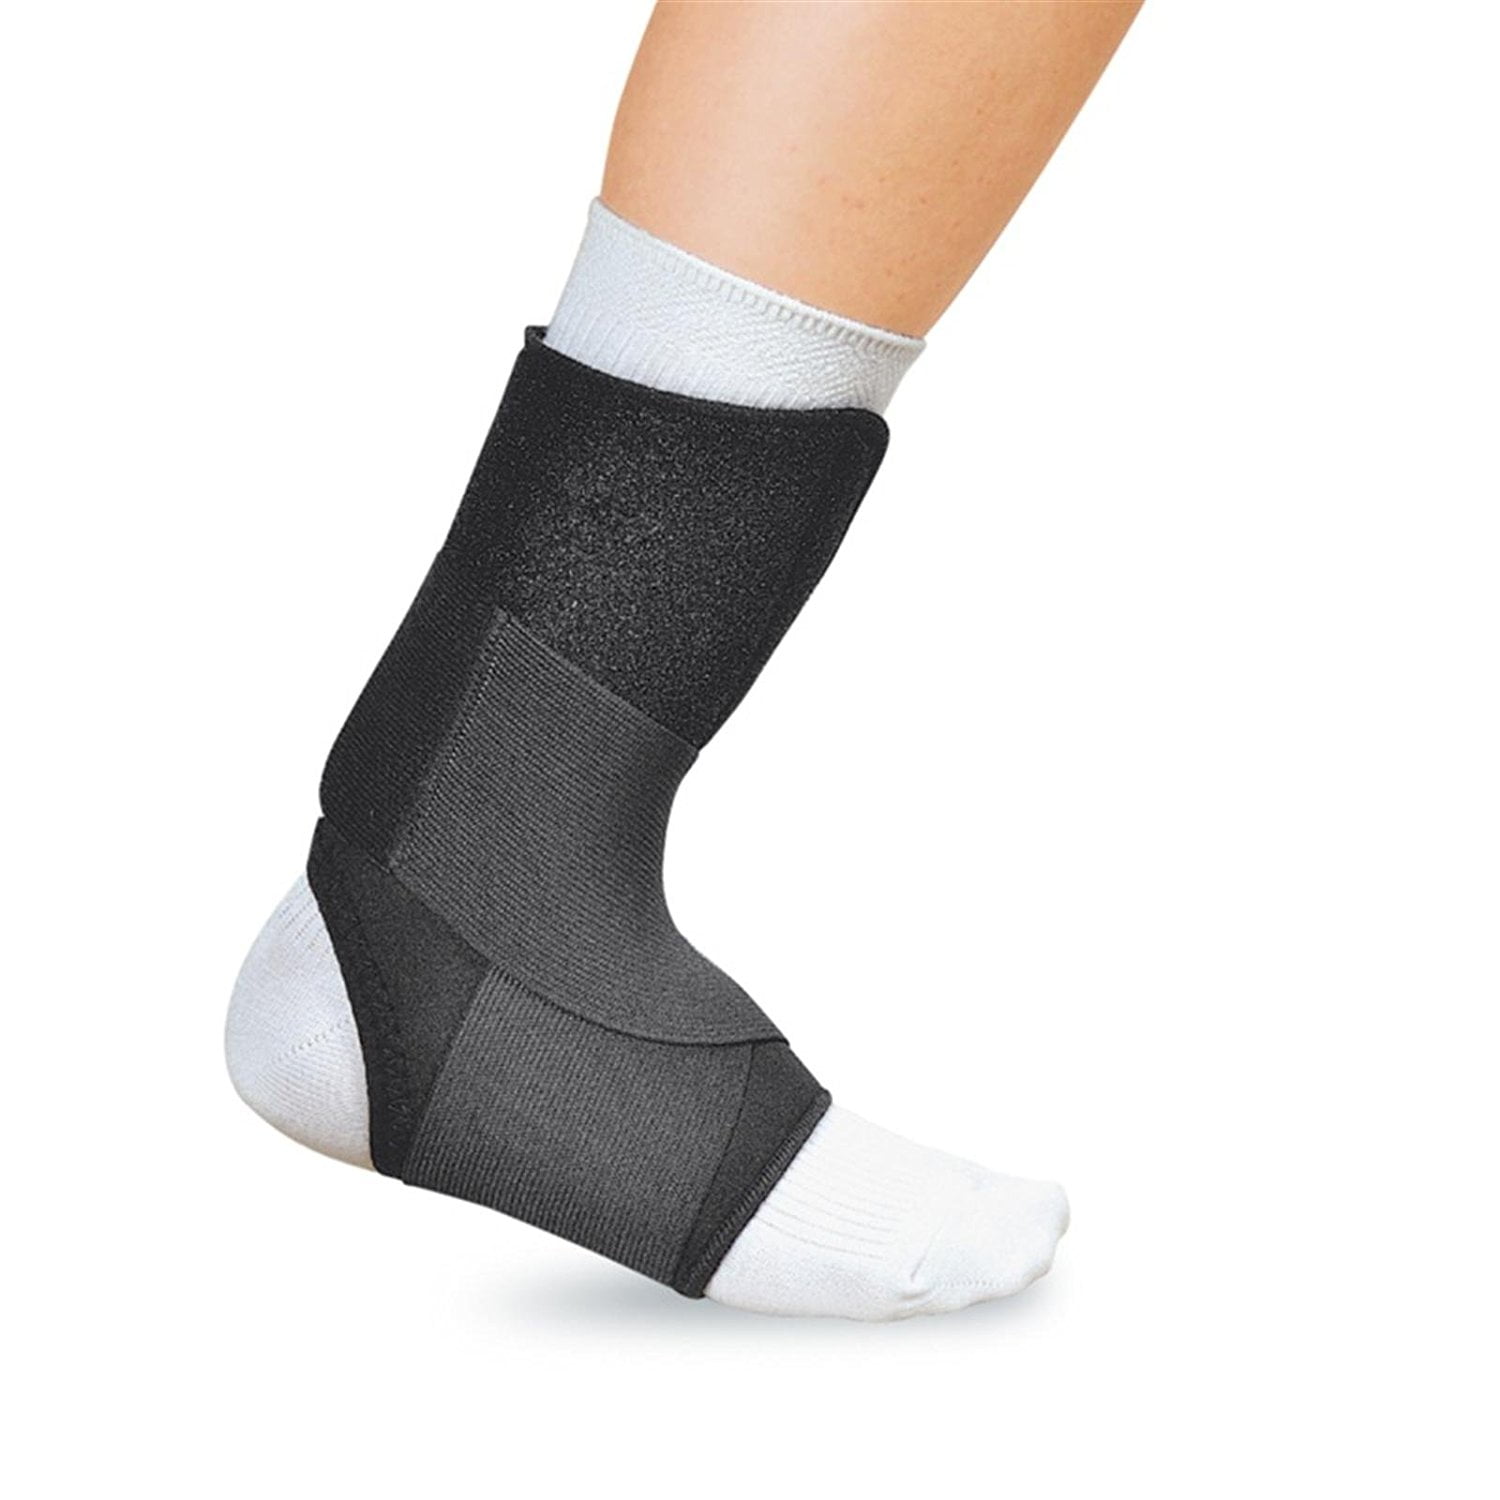 EZ-ON Wrap Around Ankle Support : X-Large, This wrap around ankle ...